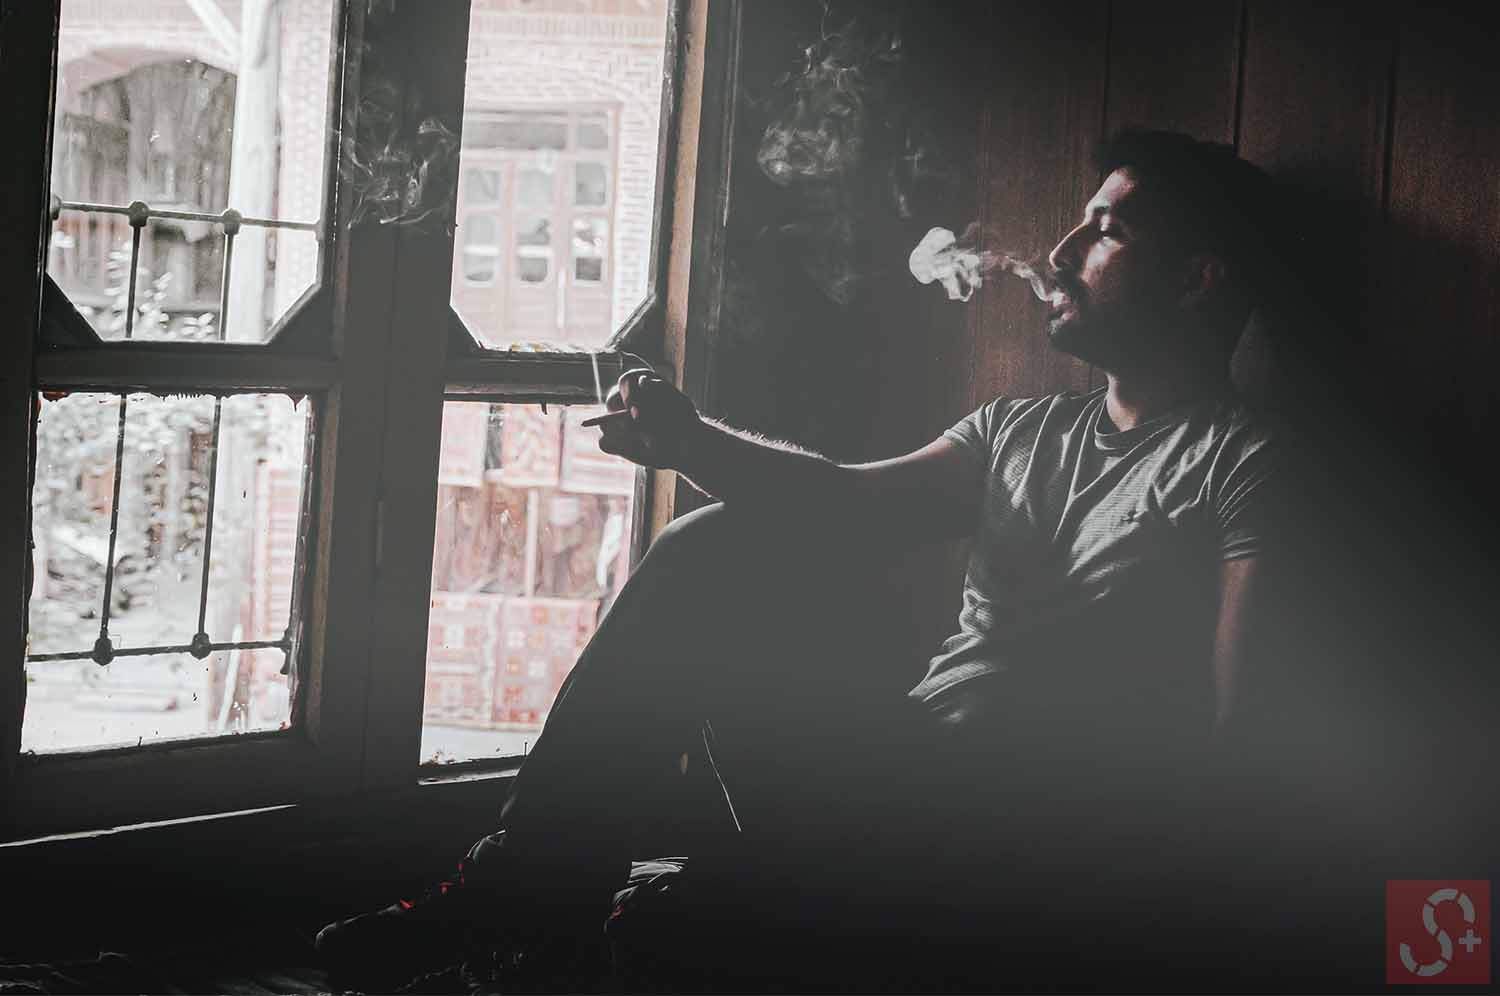 A person is smoking beside window